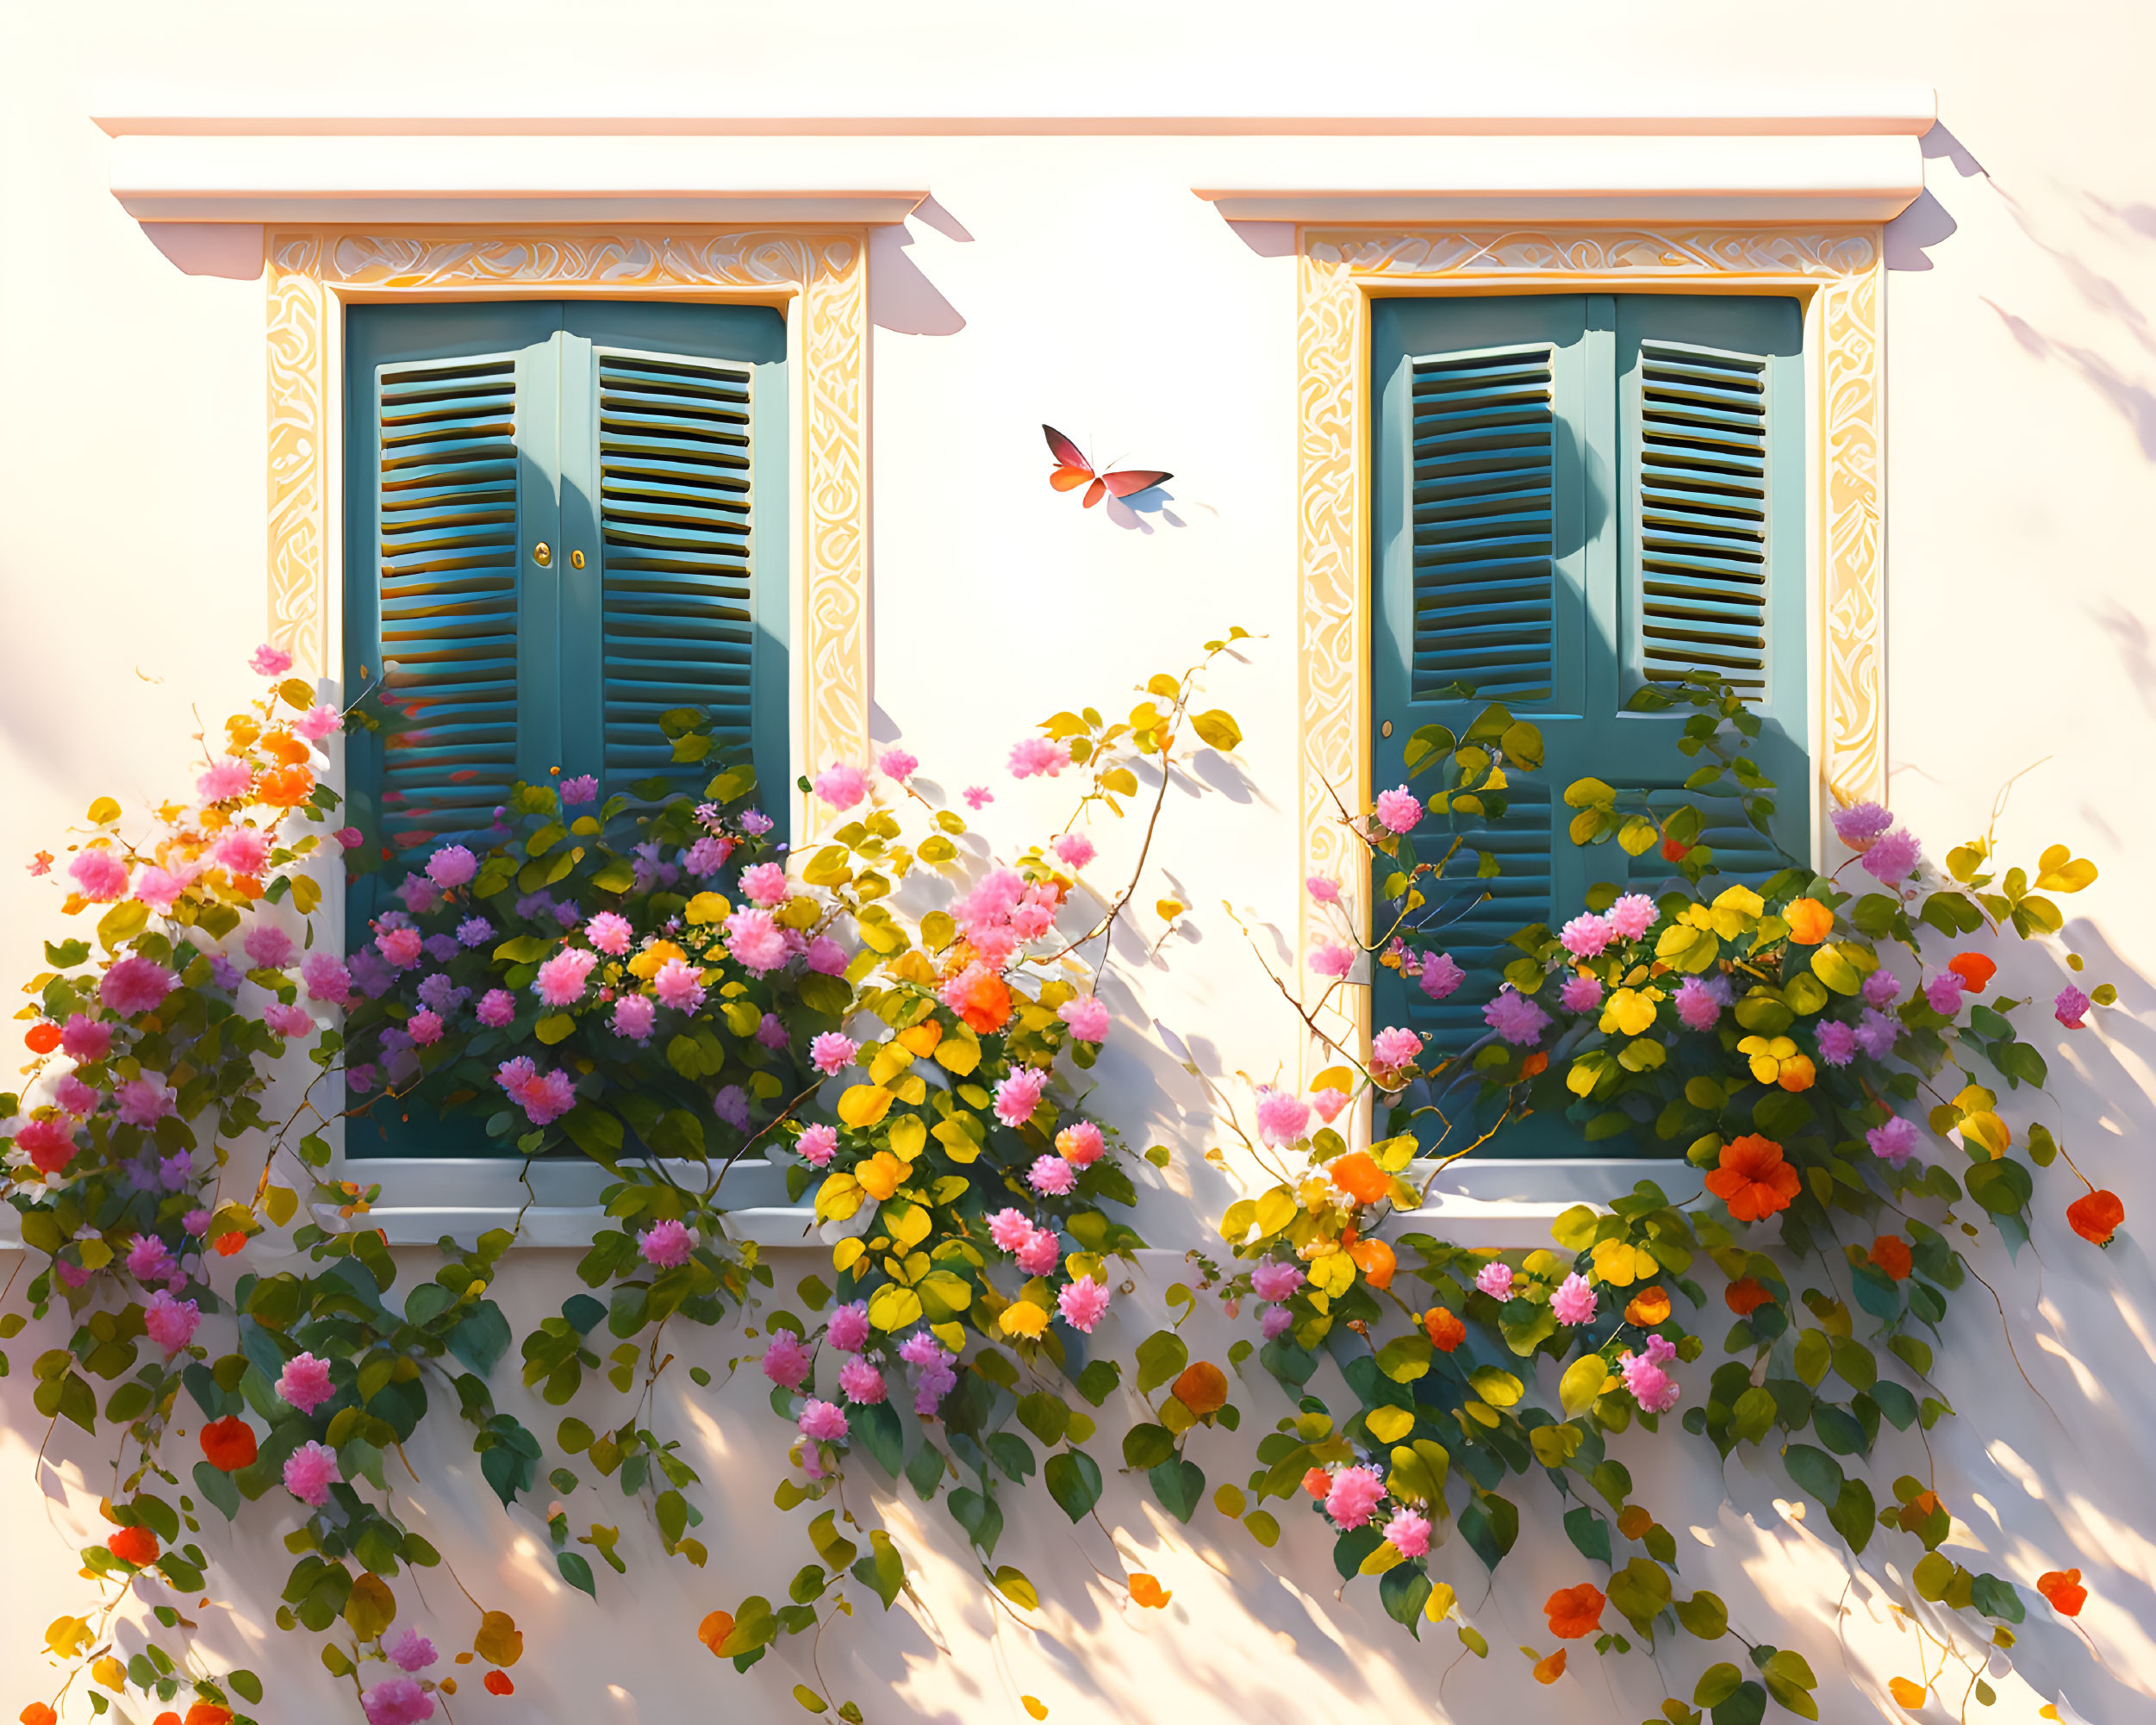 Ornate windows with blue shutters, colorful flowers, and butterfly on white wall